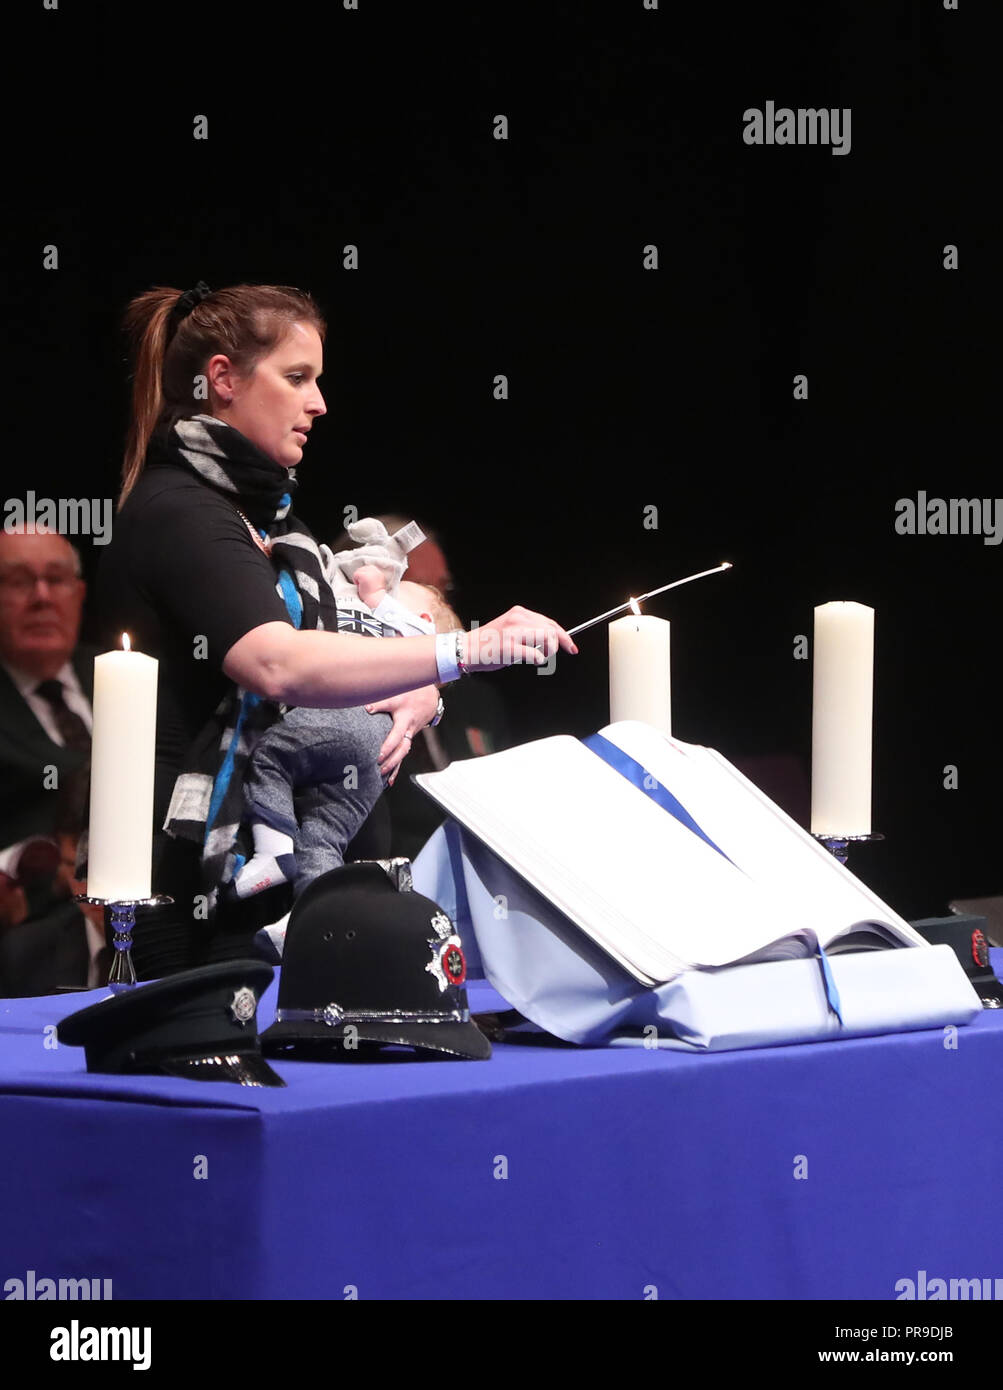 Samantha Dixon, wife of Constable James Dixon, lights a candle during the service at the Waterfront Hall, Belfast for National Police Memorial Day to honour police officers who have died or been killed in the line of duty. Stock Photo